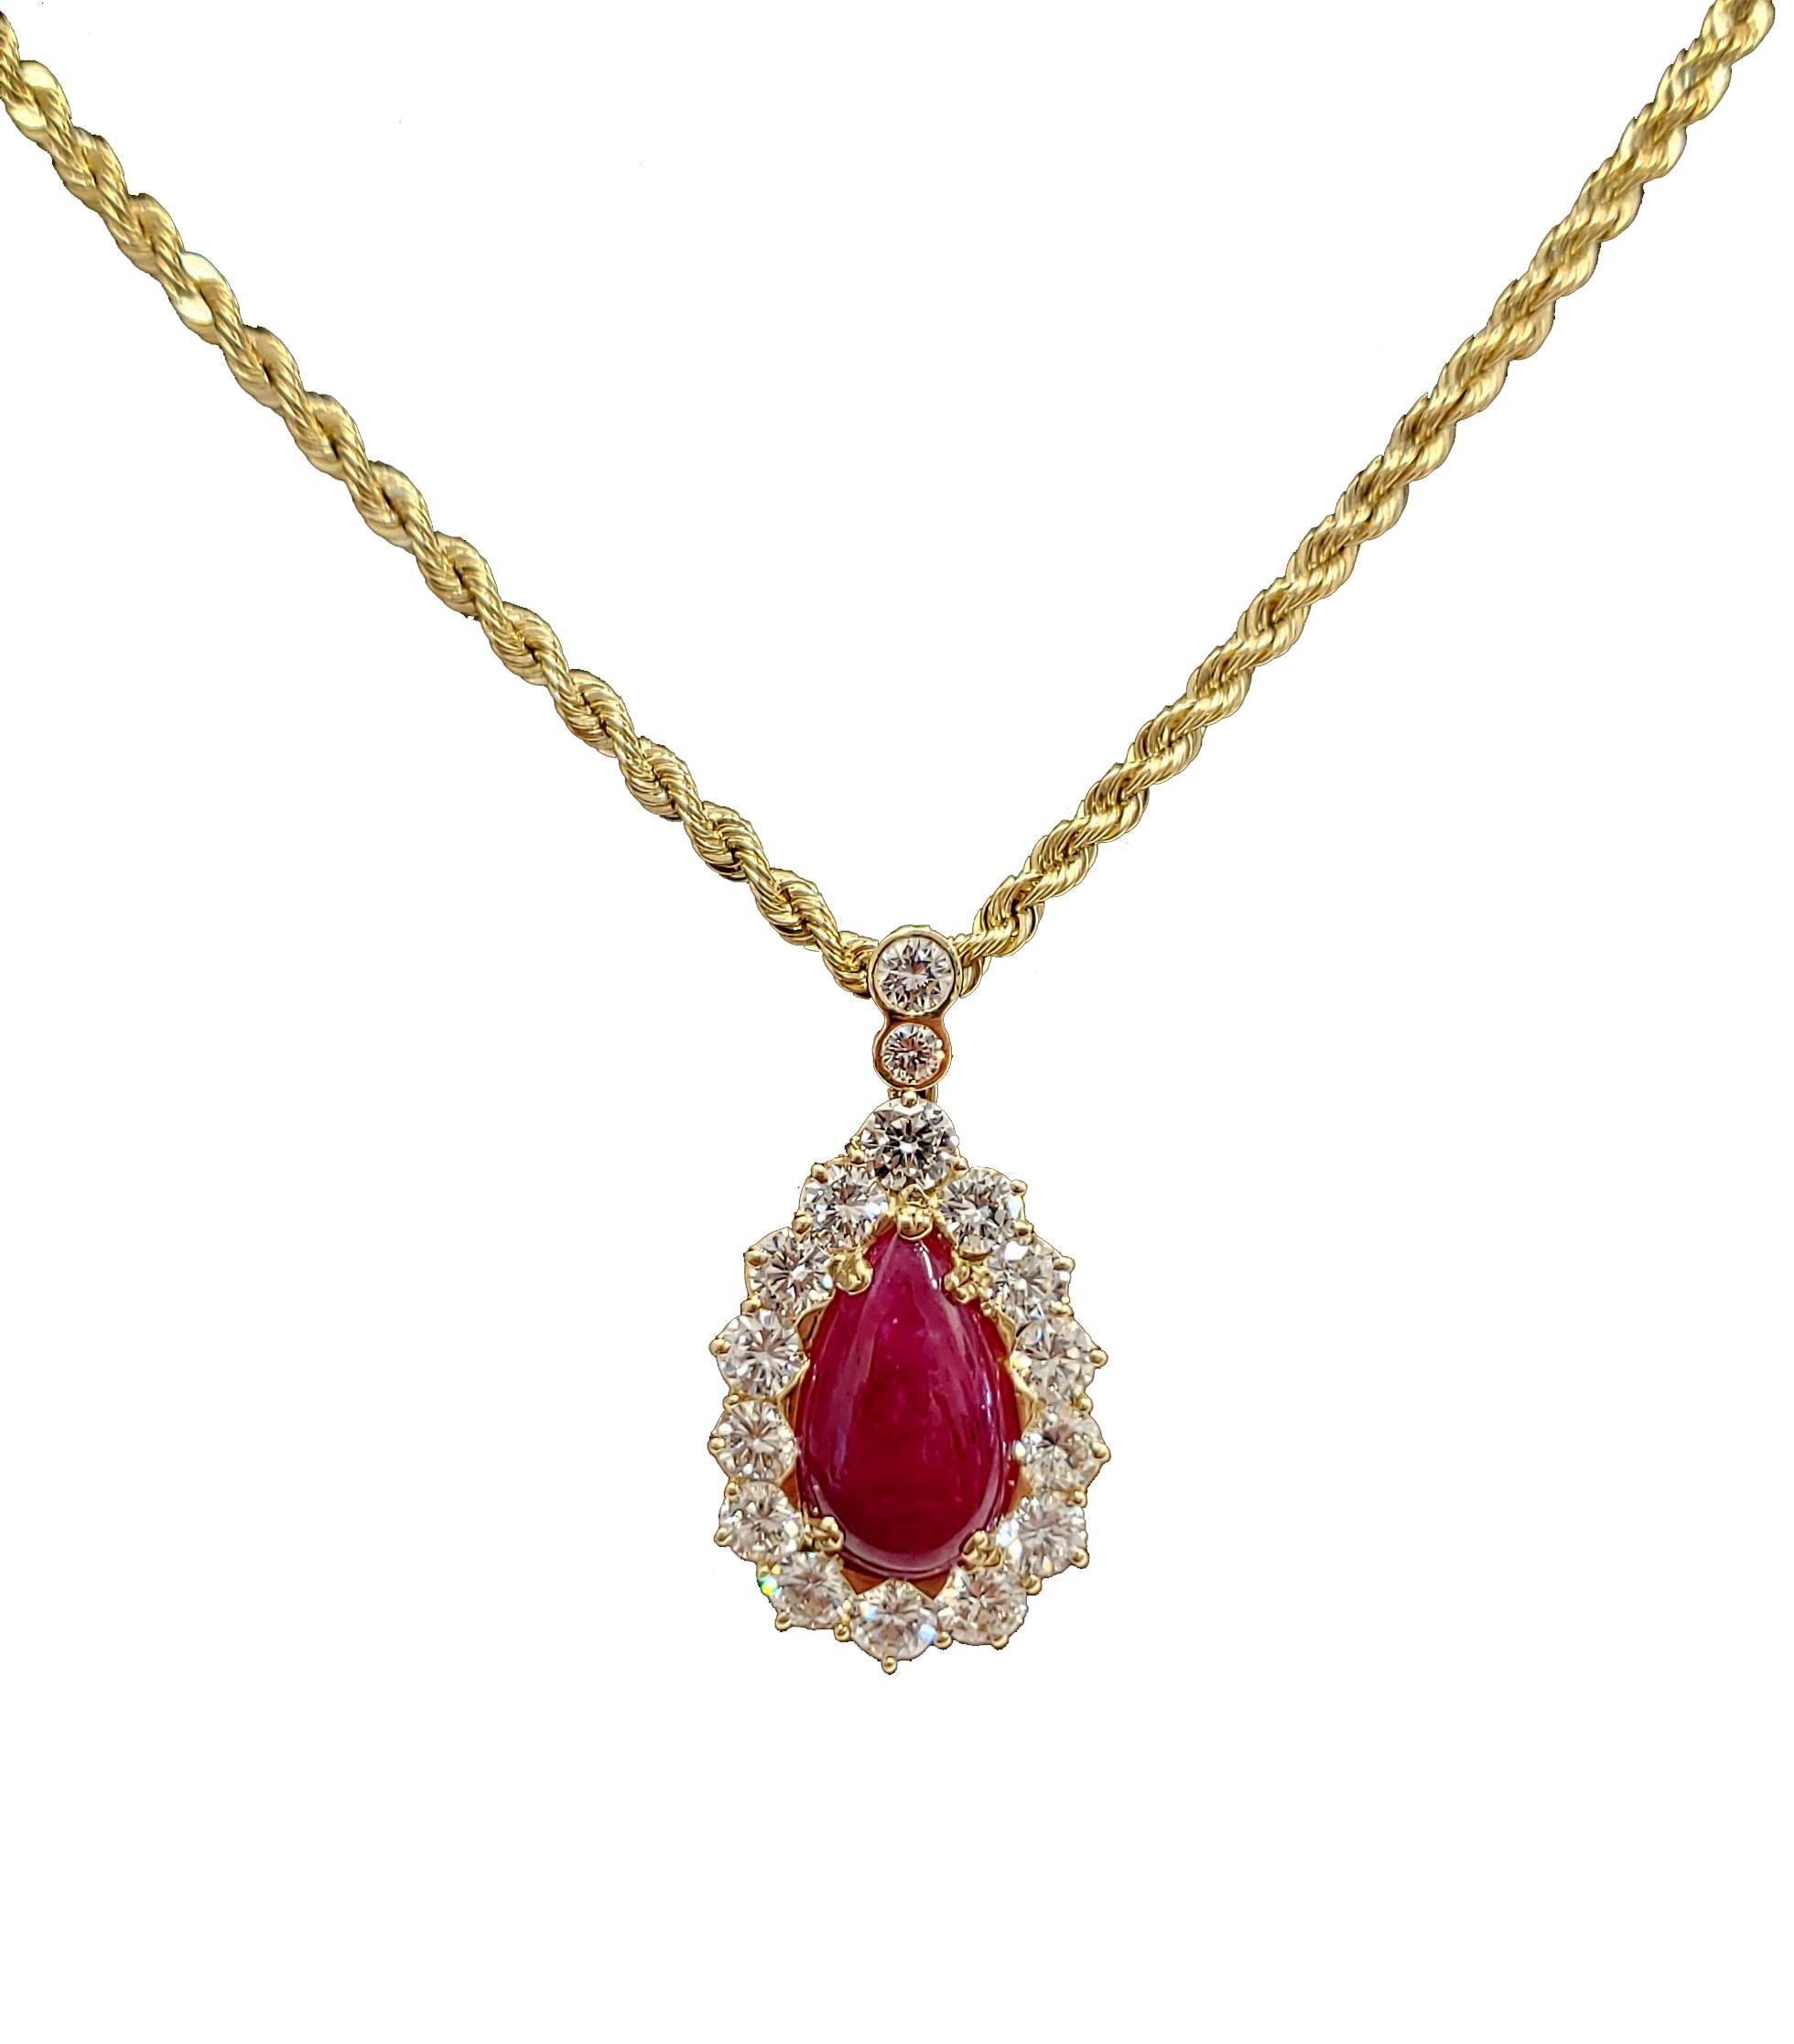 GIA certified, no heat cabochon ruby and diamond pendant and earring set. The rubies in the pendant and earrings are all GIA certified and show no indication of heating. The pendant and earrings are made with 18 karat yellow gold, the chain in 14